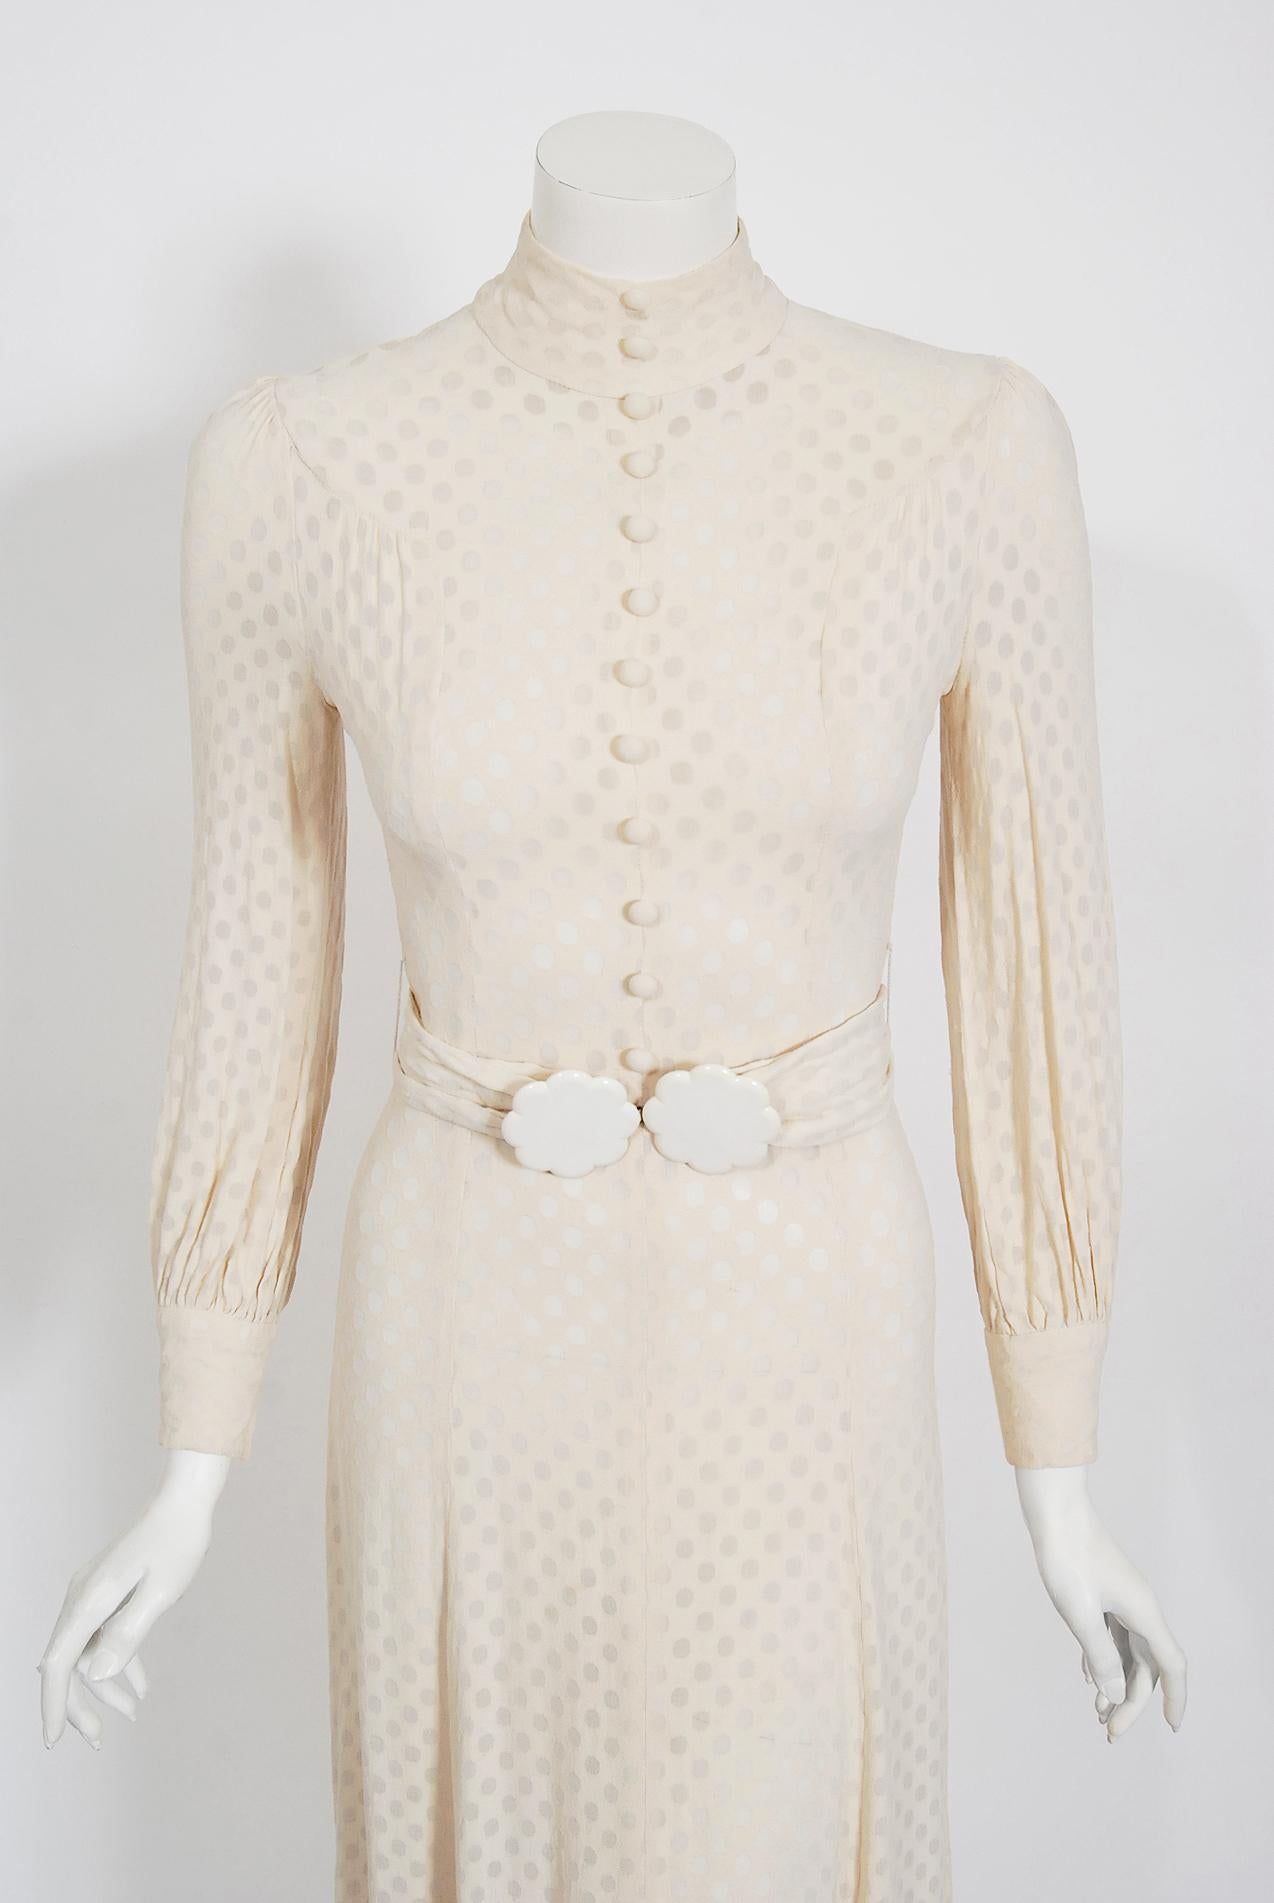 A stunning Wallis of London ivory semi-sheer dotted crepe dress, dating back to the early 1970's. The bodice has the chicest high-neck with tailored pleat work to create flattering curves. I love the front covered buttons which are also mirrored on